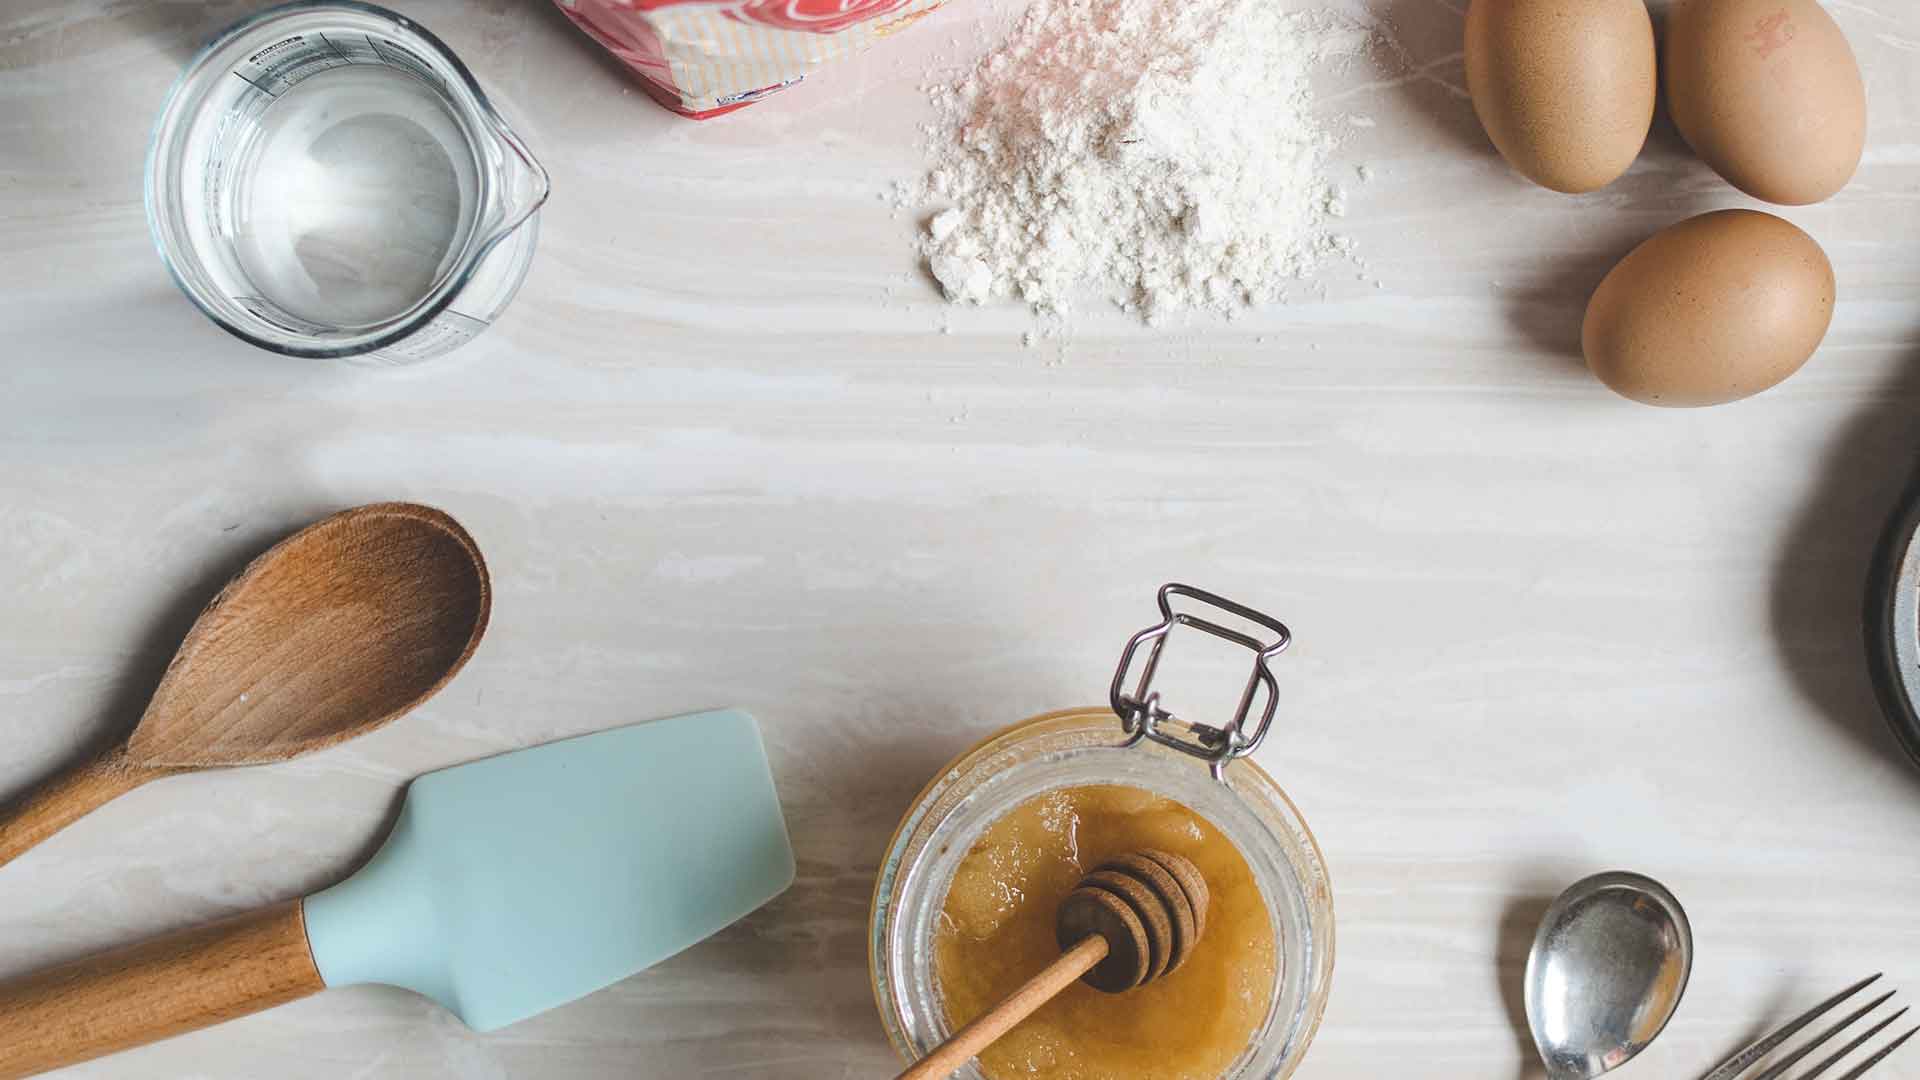 Baking ingredients like eggs and flour, and tools like a wooden spoon and spatula